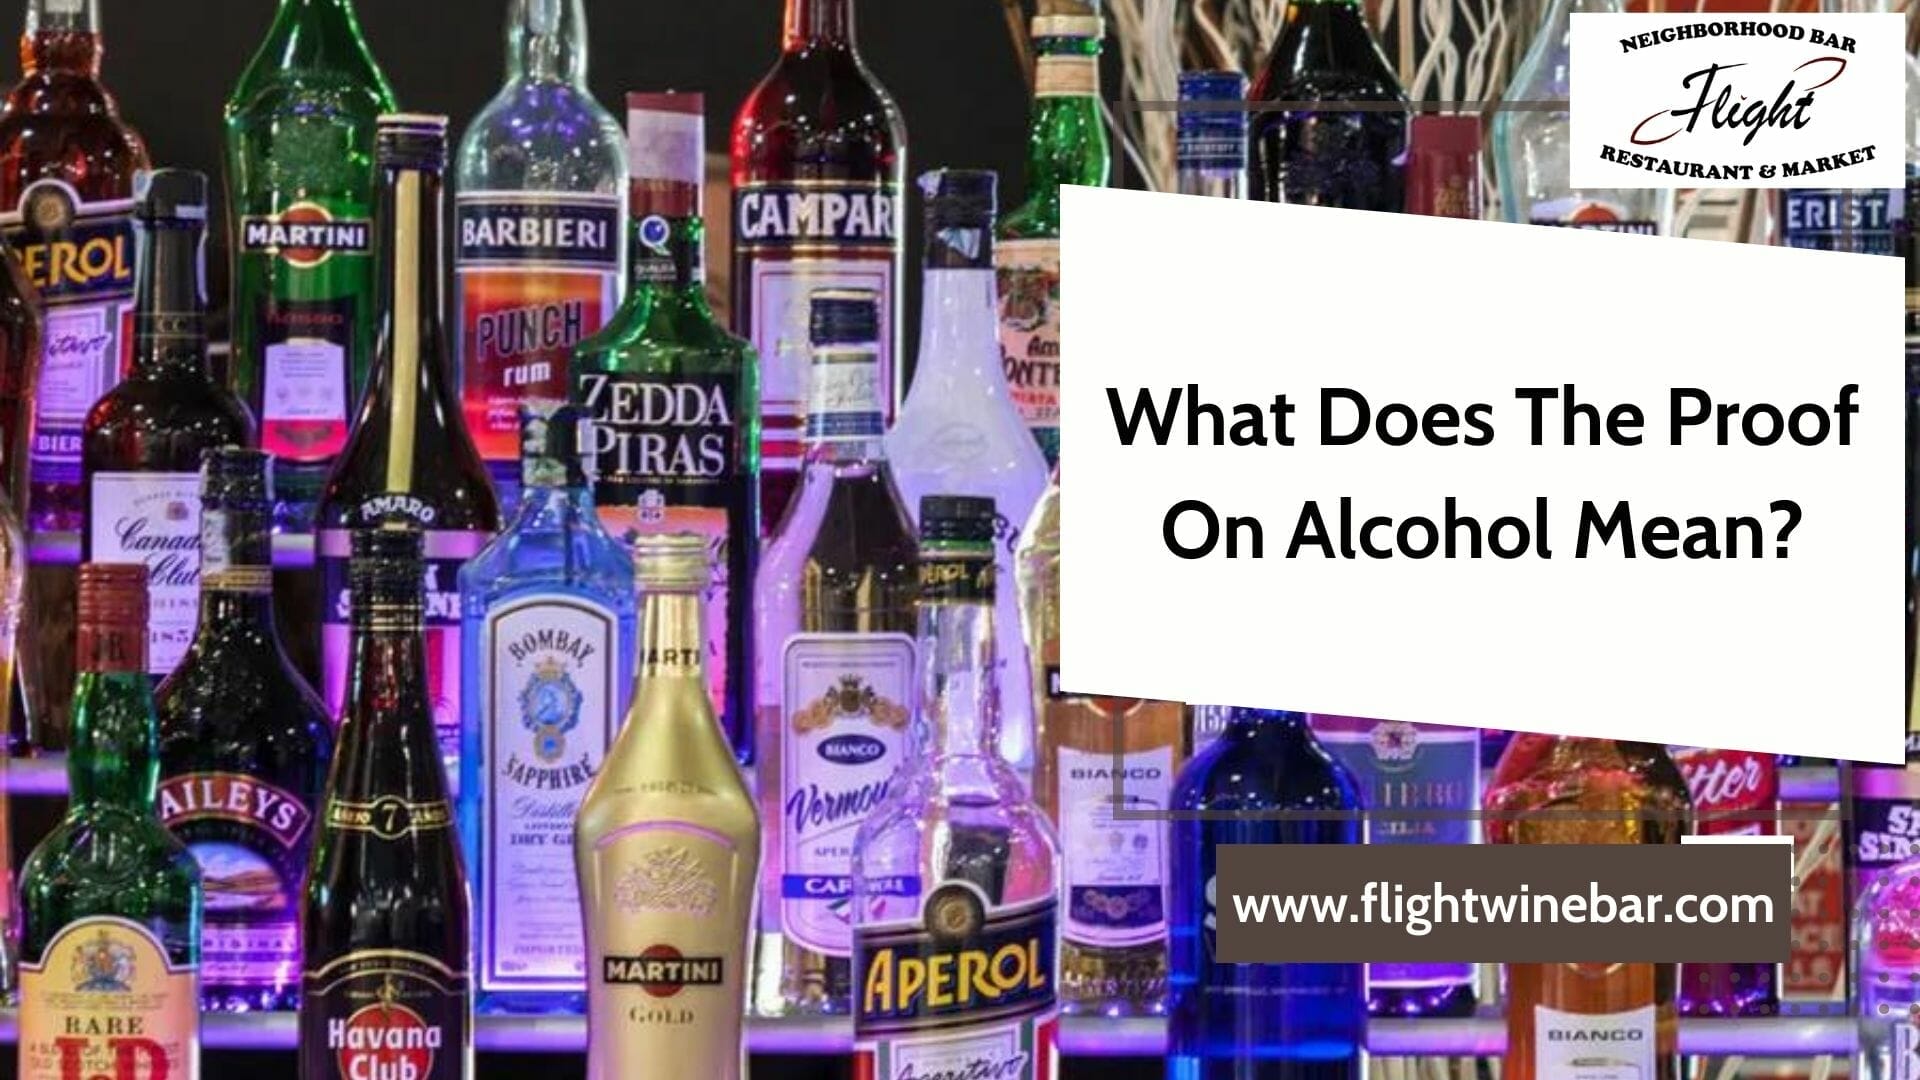 What Does The Proof On Alcohol Mean